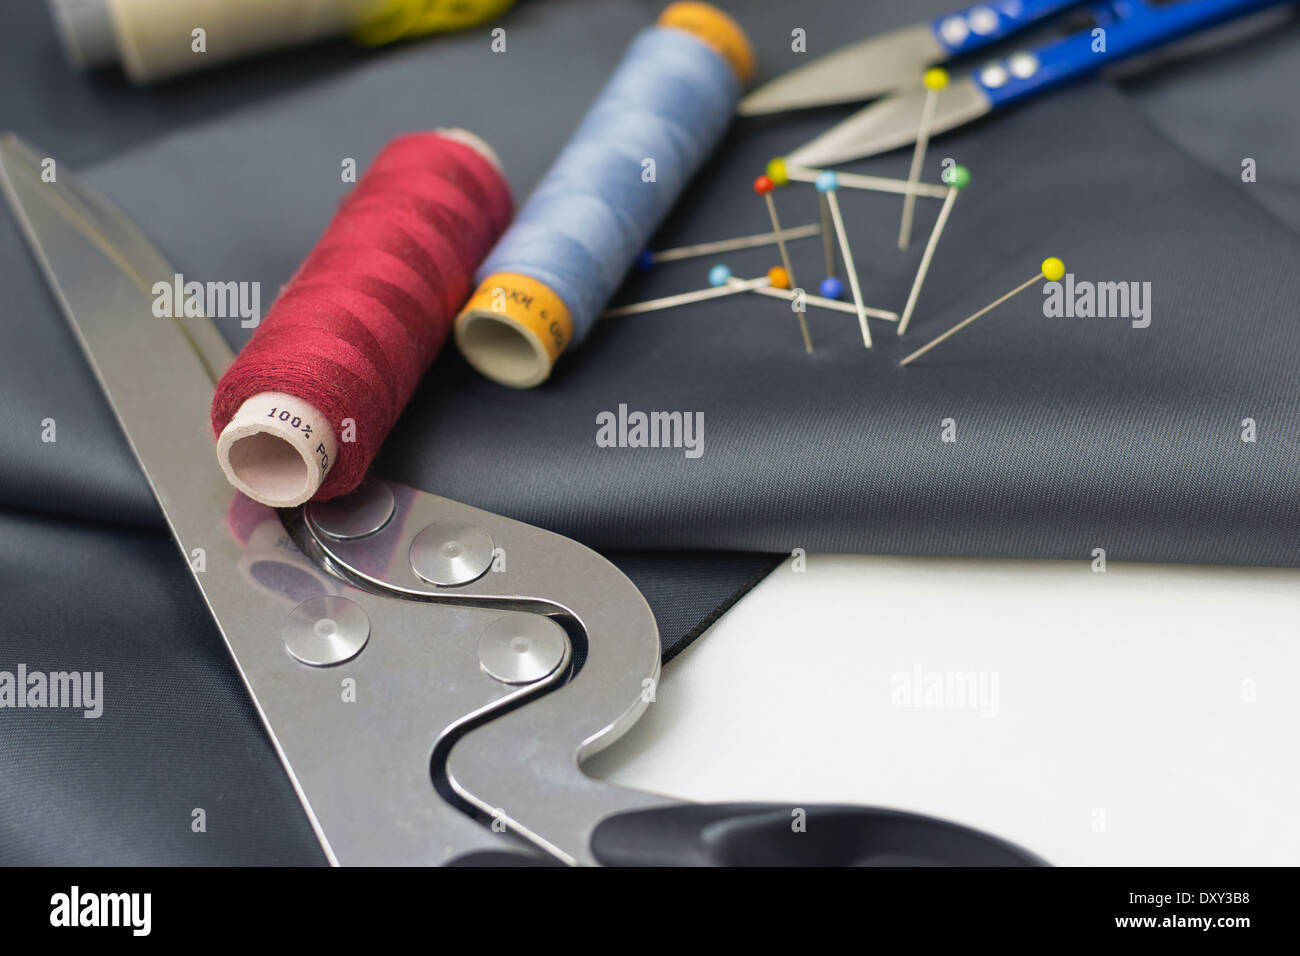 Thread spools, pin and yellow measuring tape on grey fabric. Stock Photo